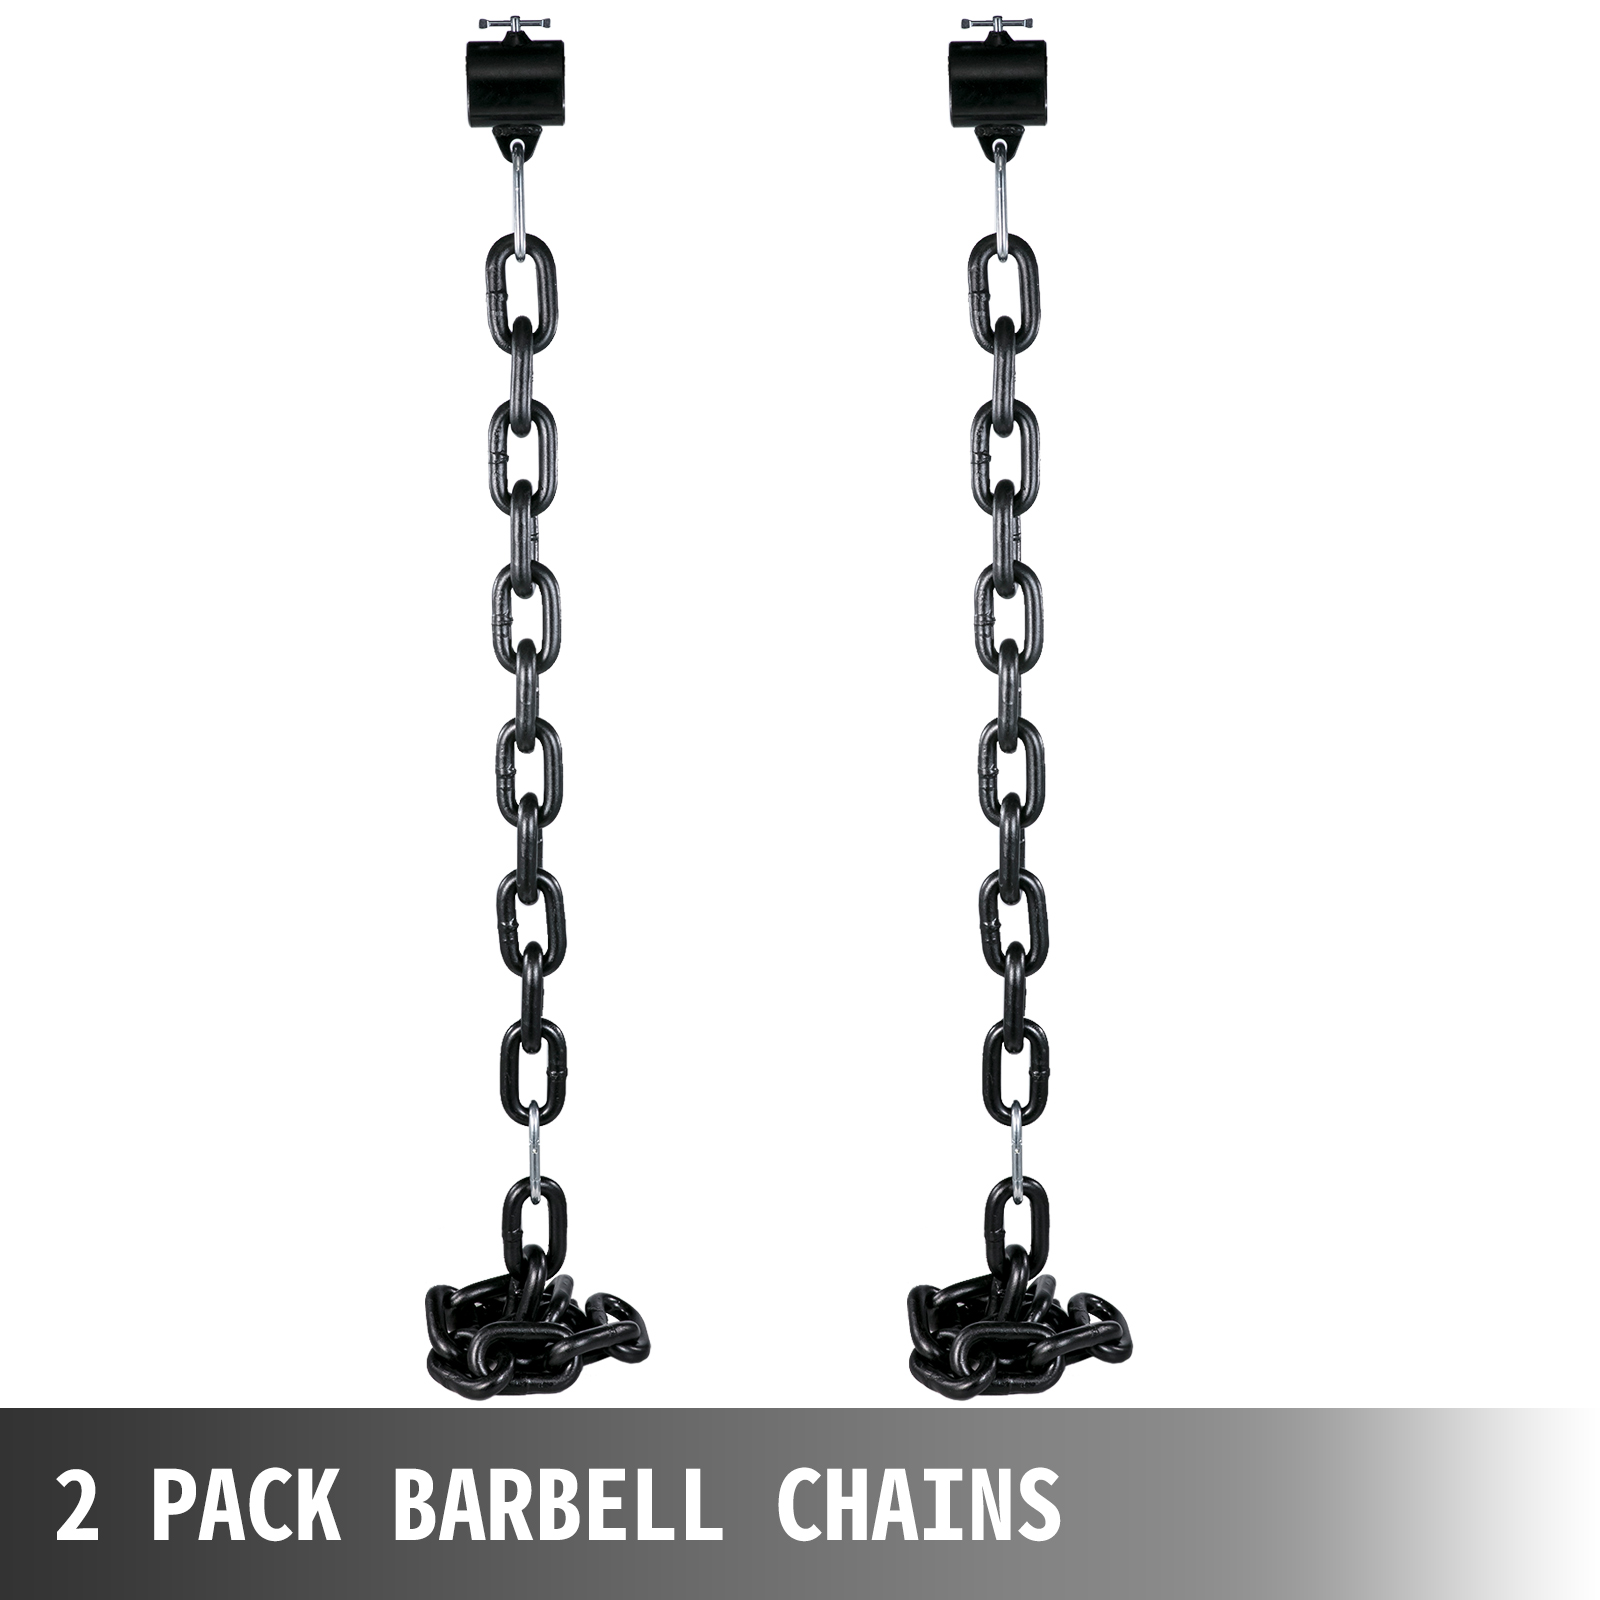 Weight Lifting Chains Pairs 26LB/12kg Barbell Chains w/Collars Fitness Strength